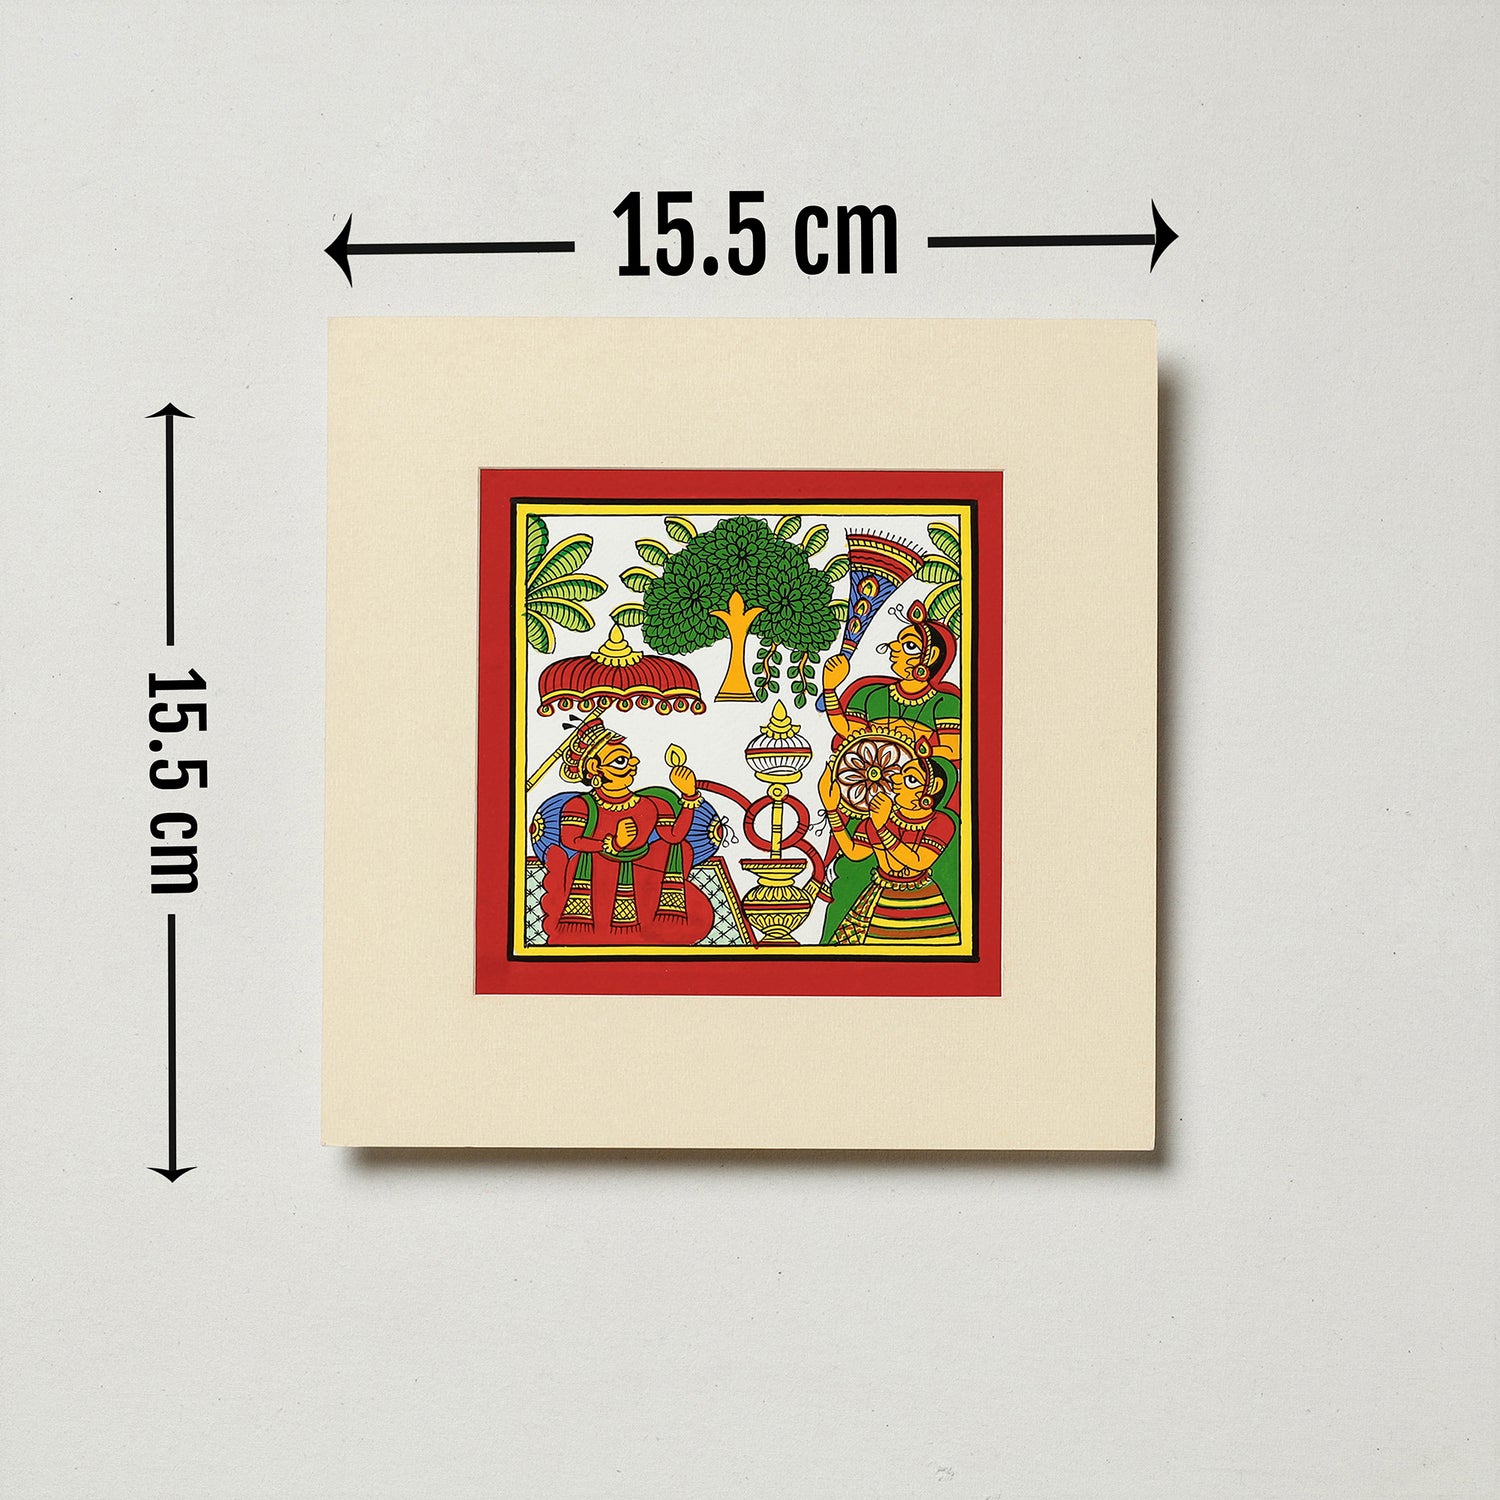 Traditional Phad Painting by Kalyan Joshi (6 x 6 in)